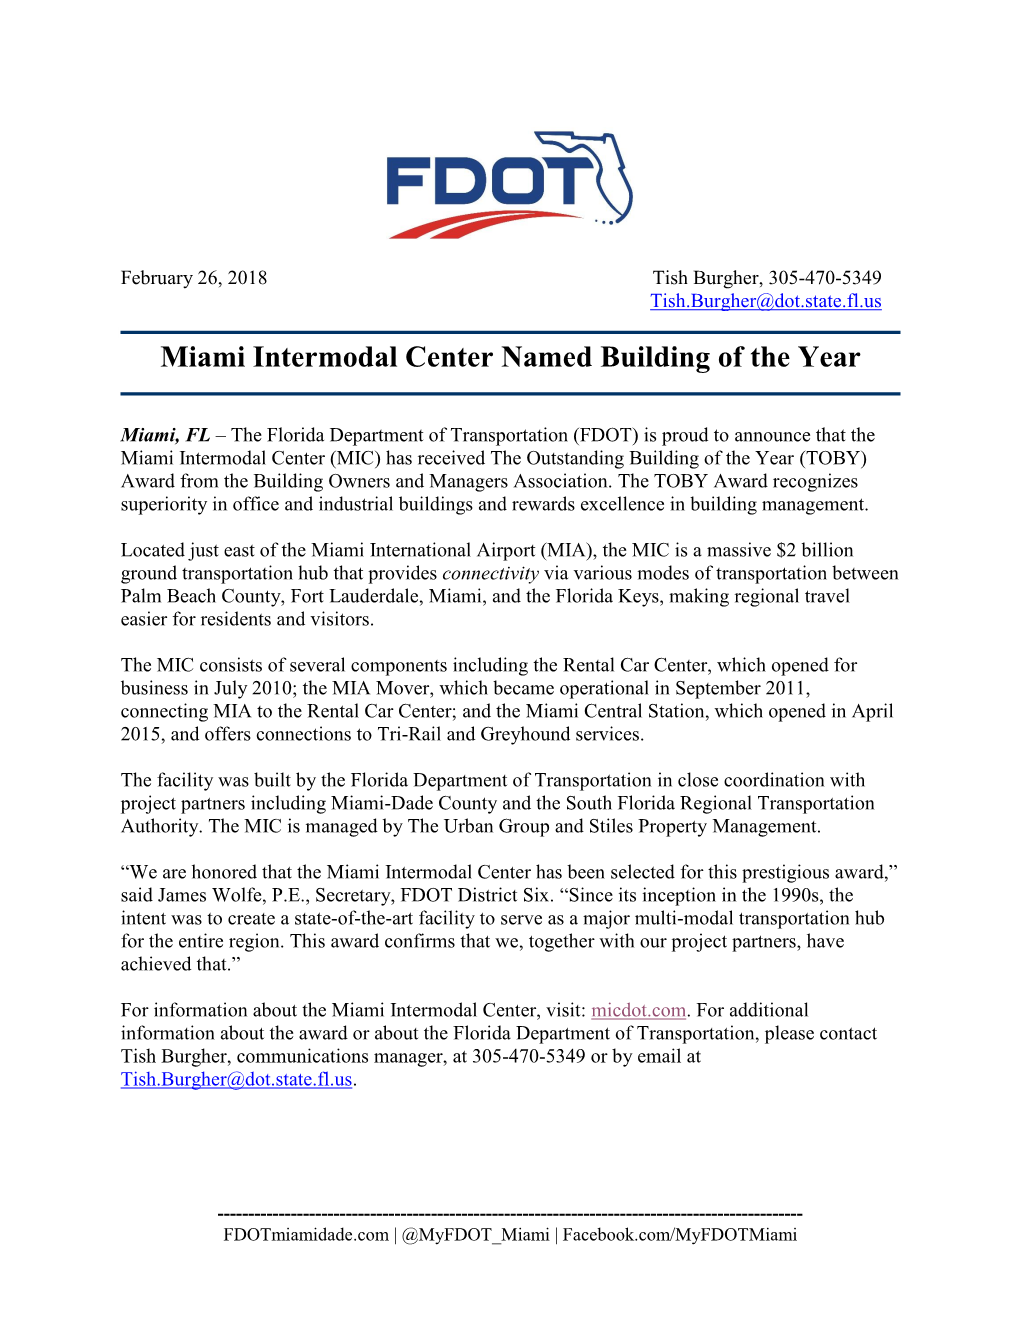 Miami Intermodal Center Named Building of the Year